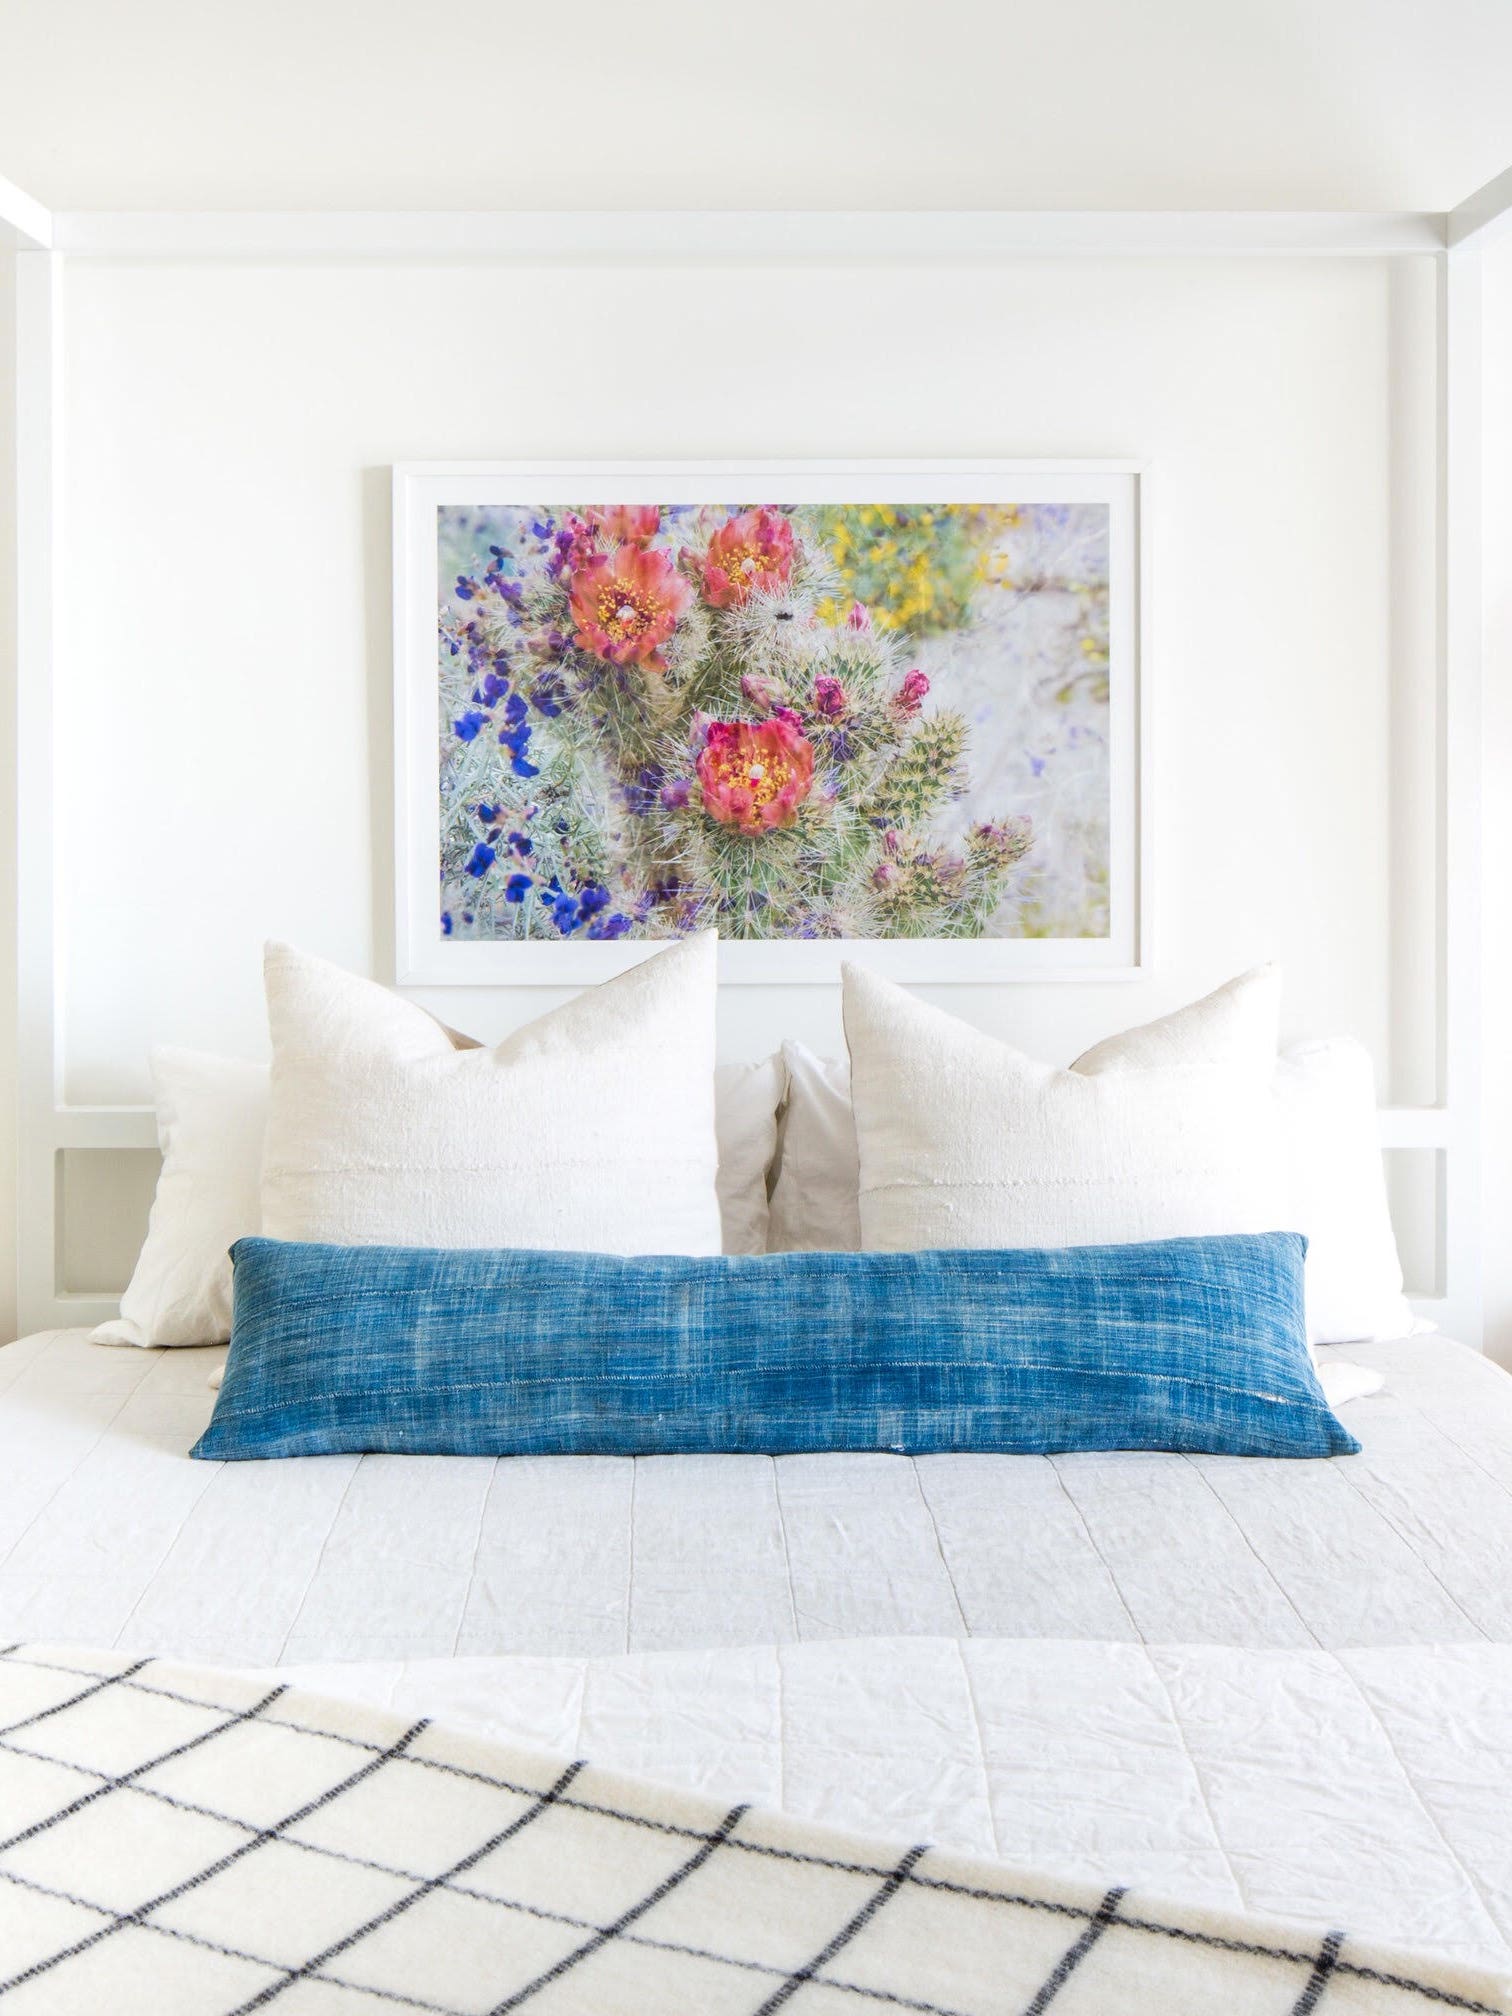 11 Affordable Decor Tips for Making Your Rental Look High-End